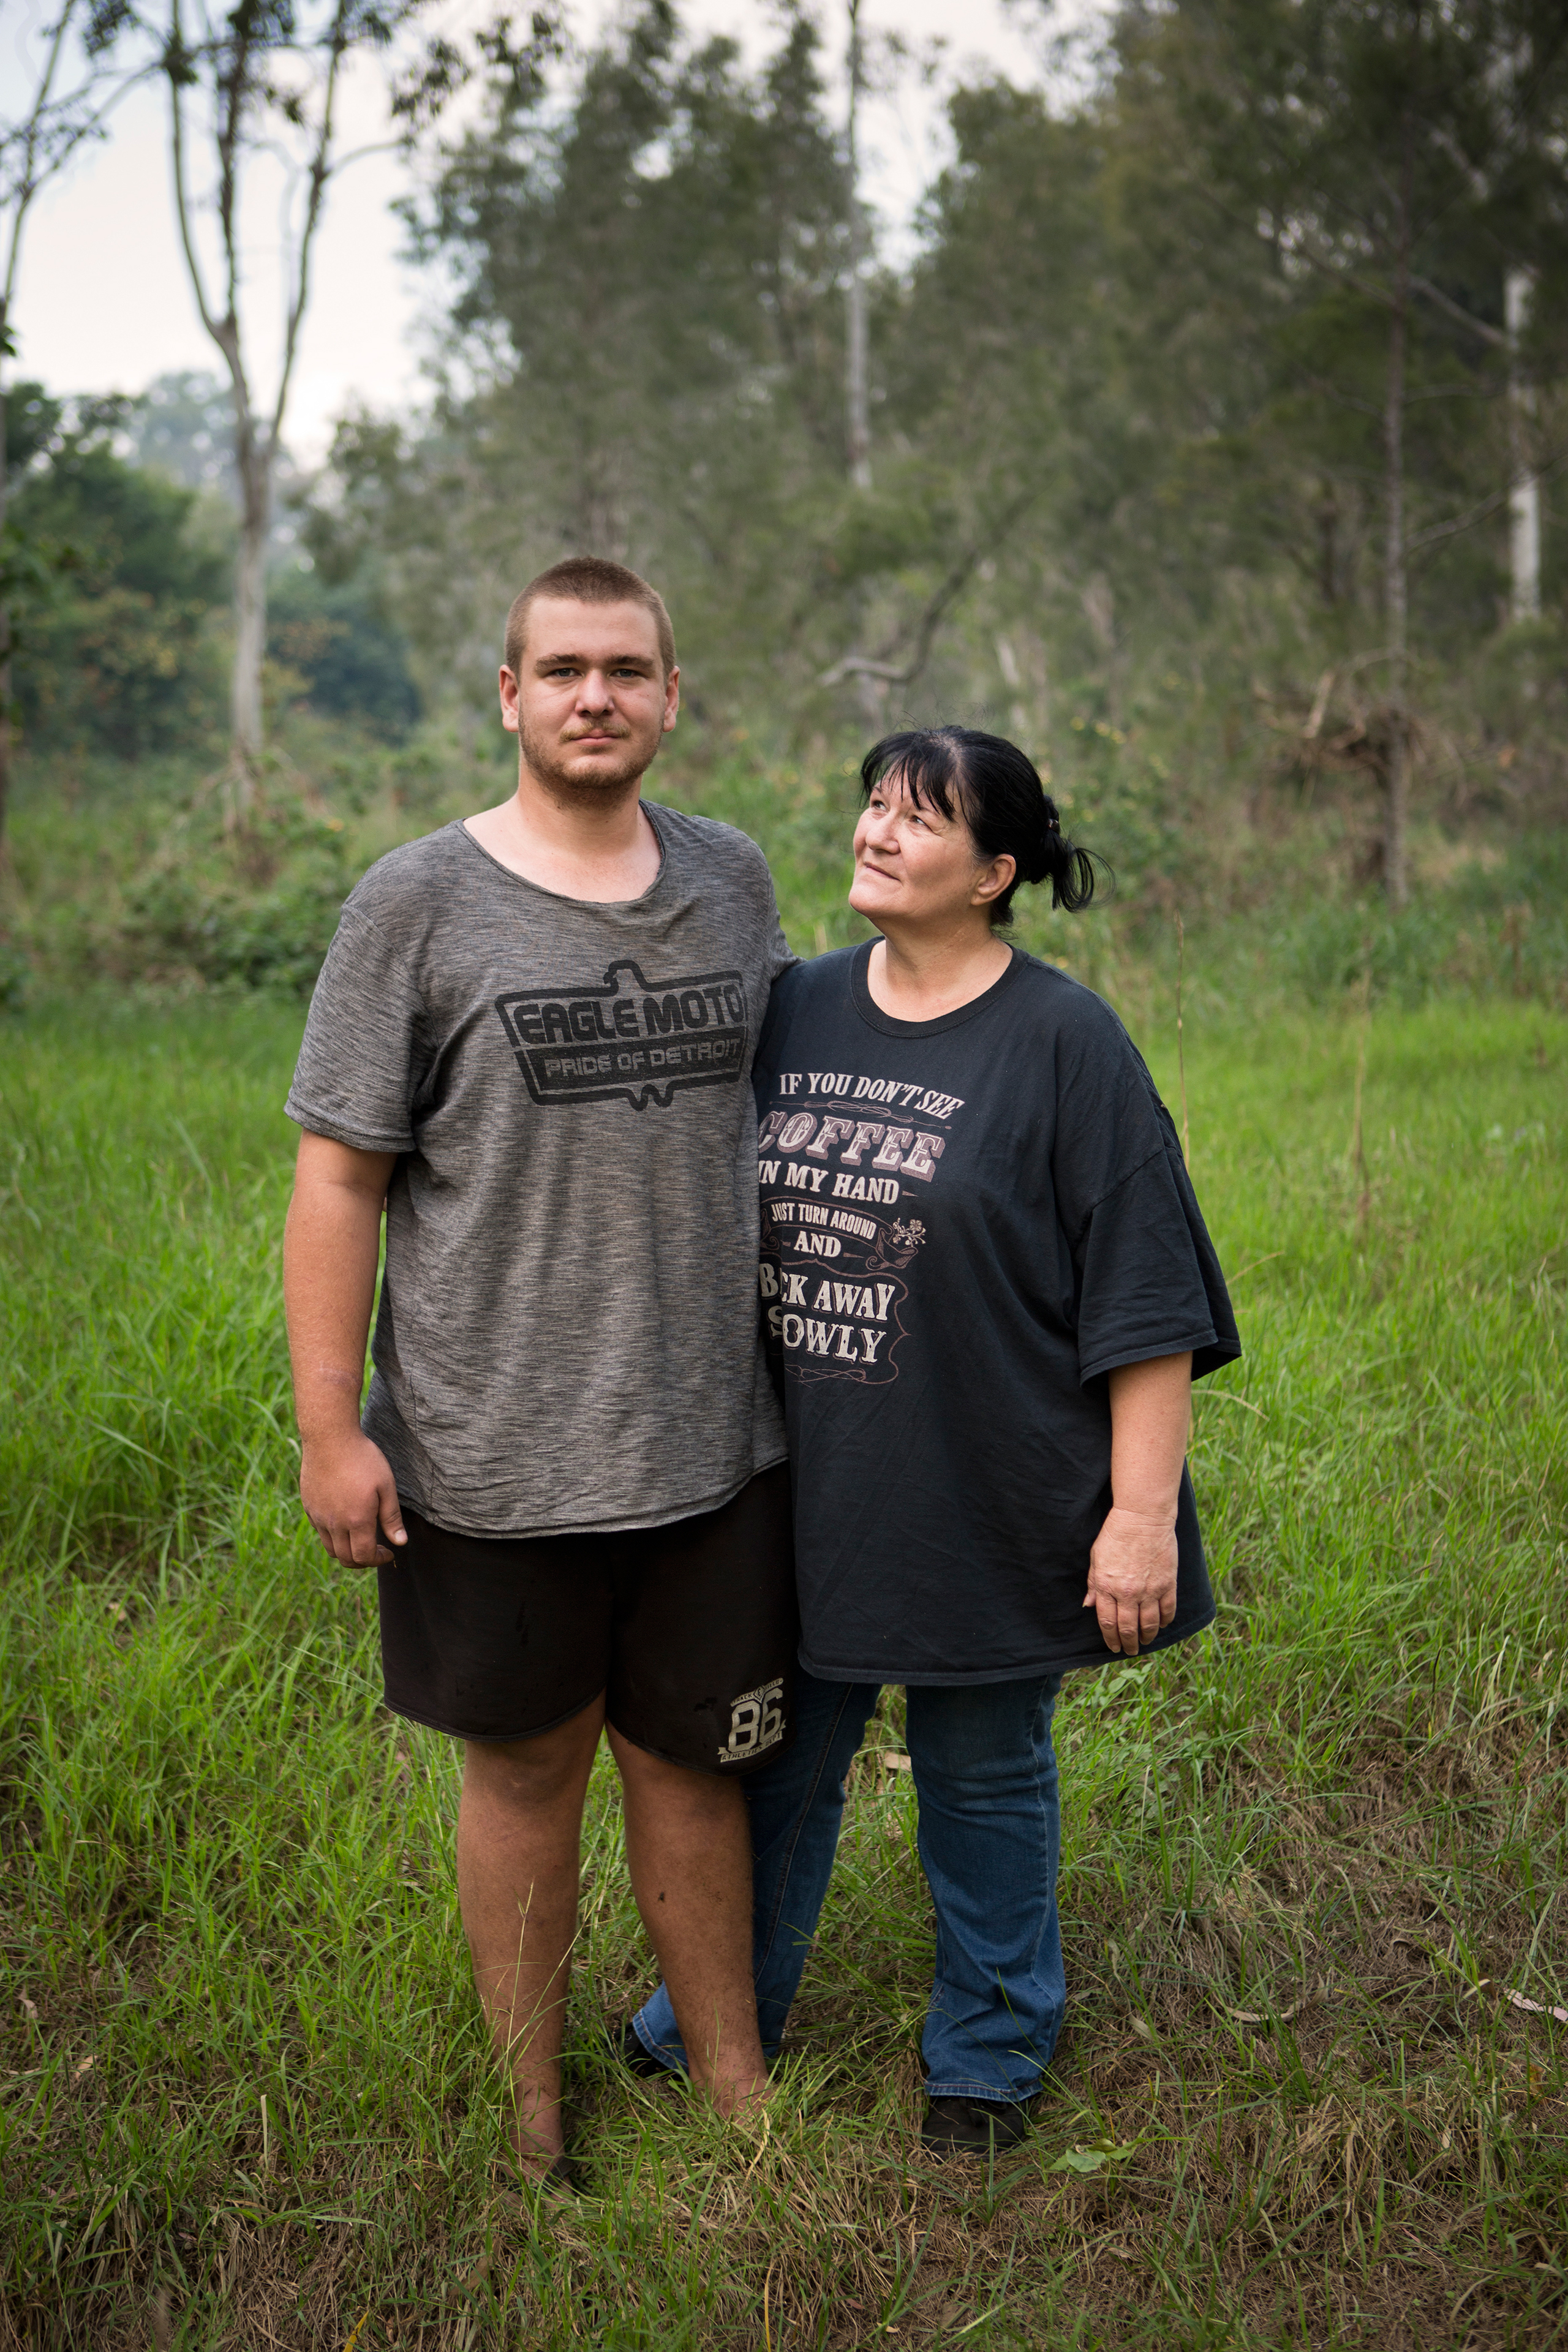 Daphne and her son Wylie near their home in Rockhampton in April 2017. Wylie is currently clean after previously battling an addiction to ice. (David Maurice Smith—Oculi for TIME)